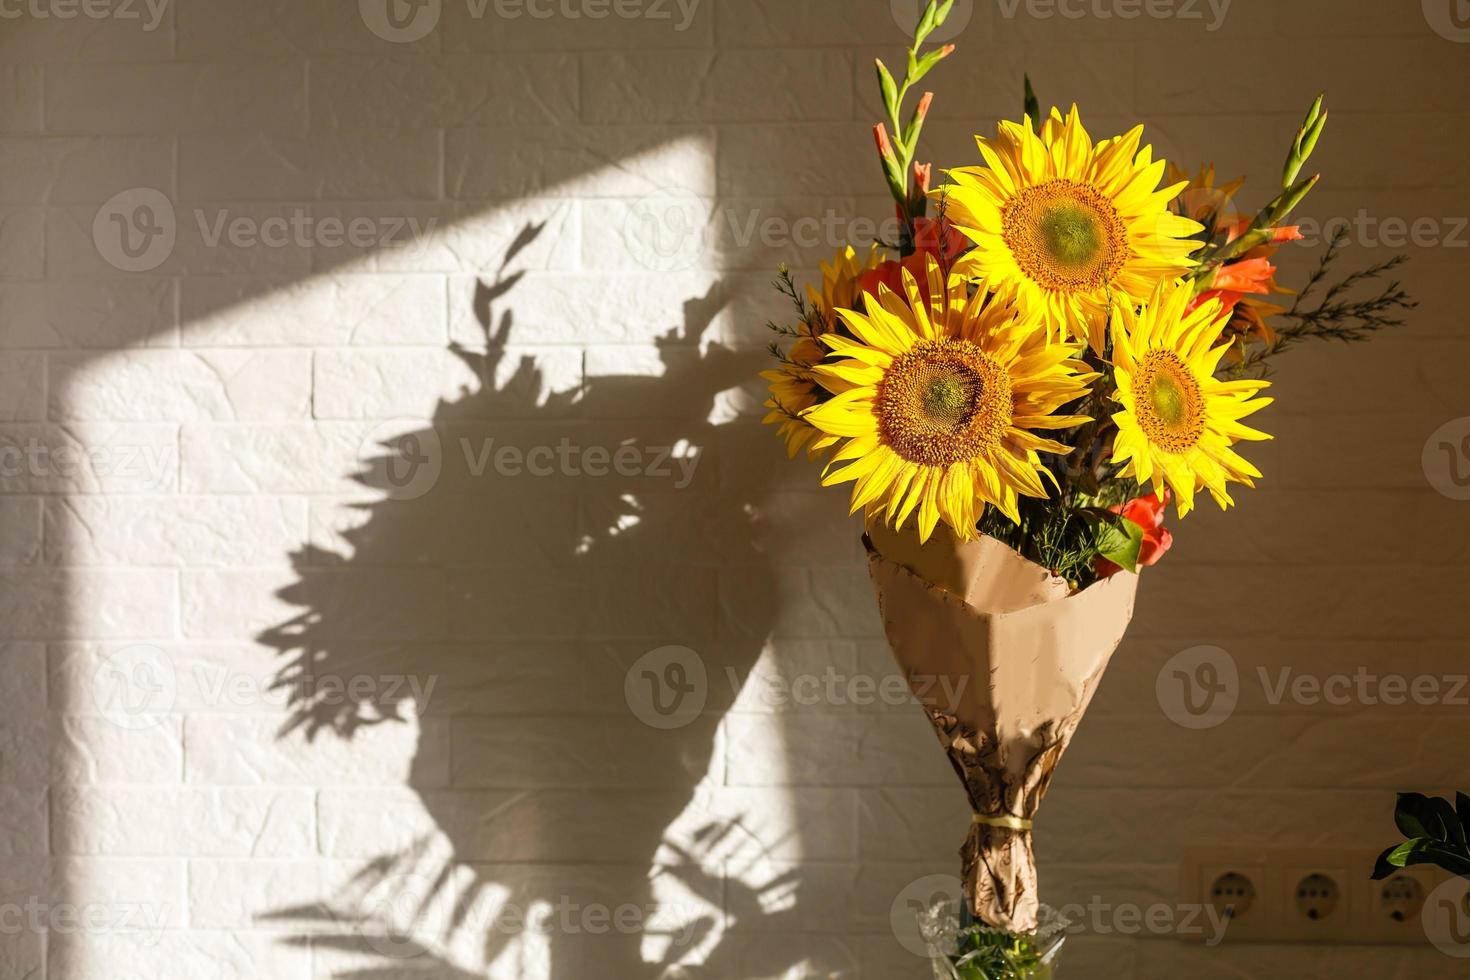 Beautiful sunflowers in a vase photo